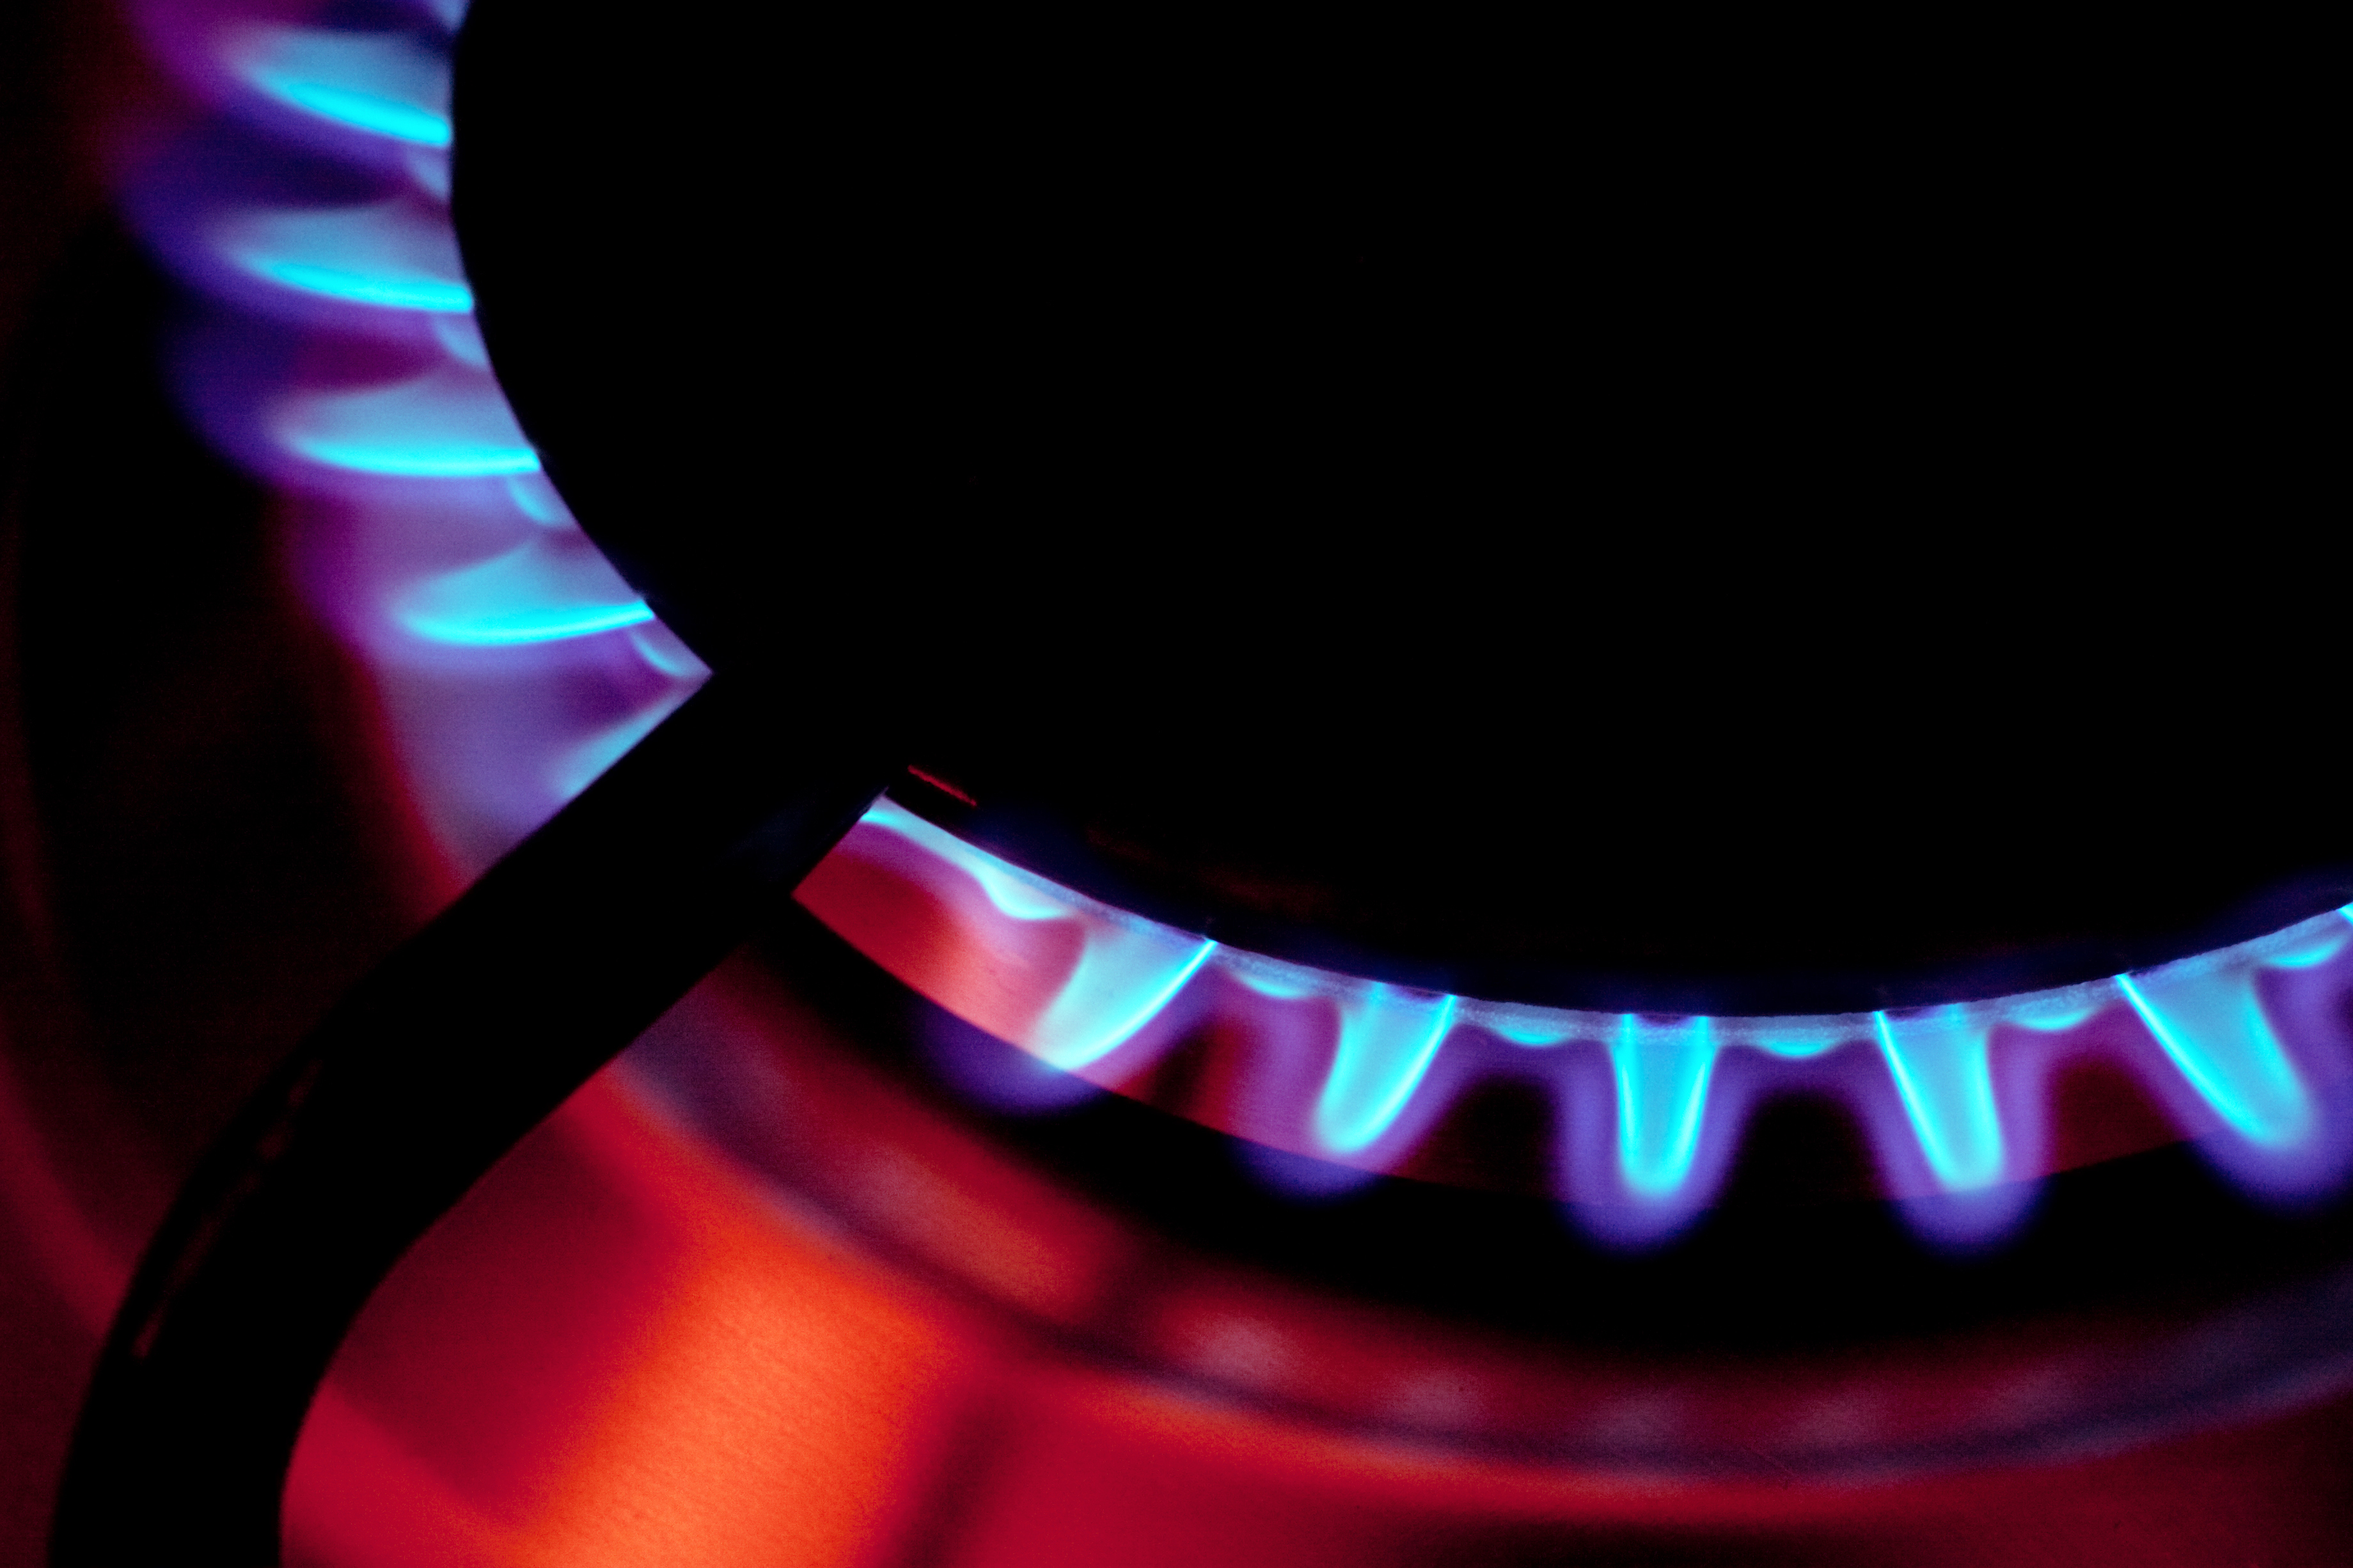 Blue flames burn on a gas stove.